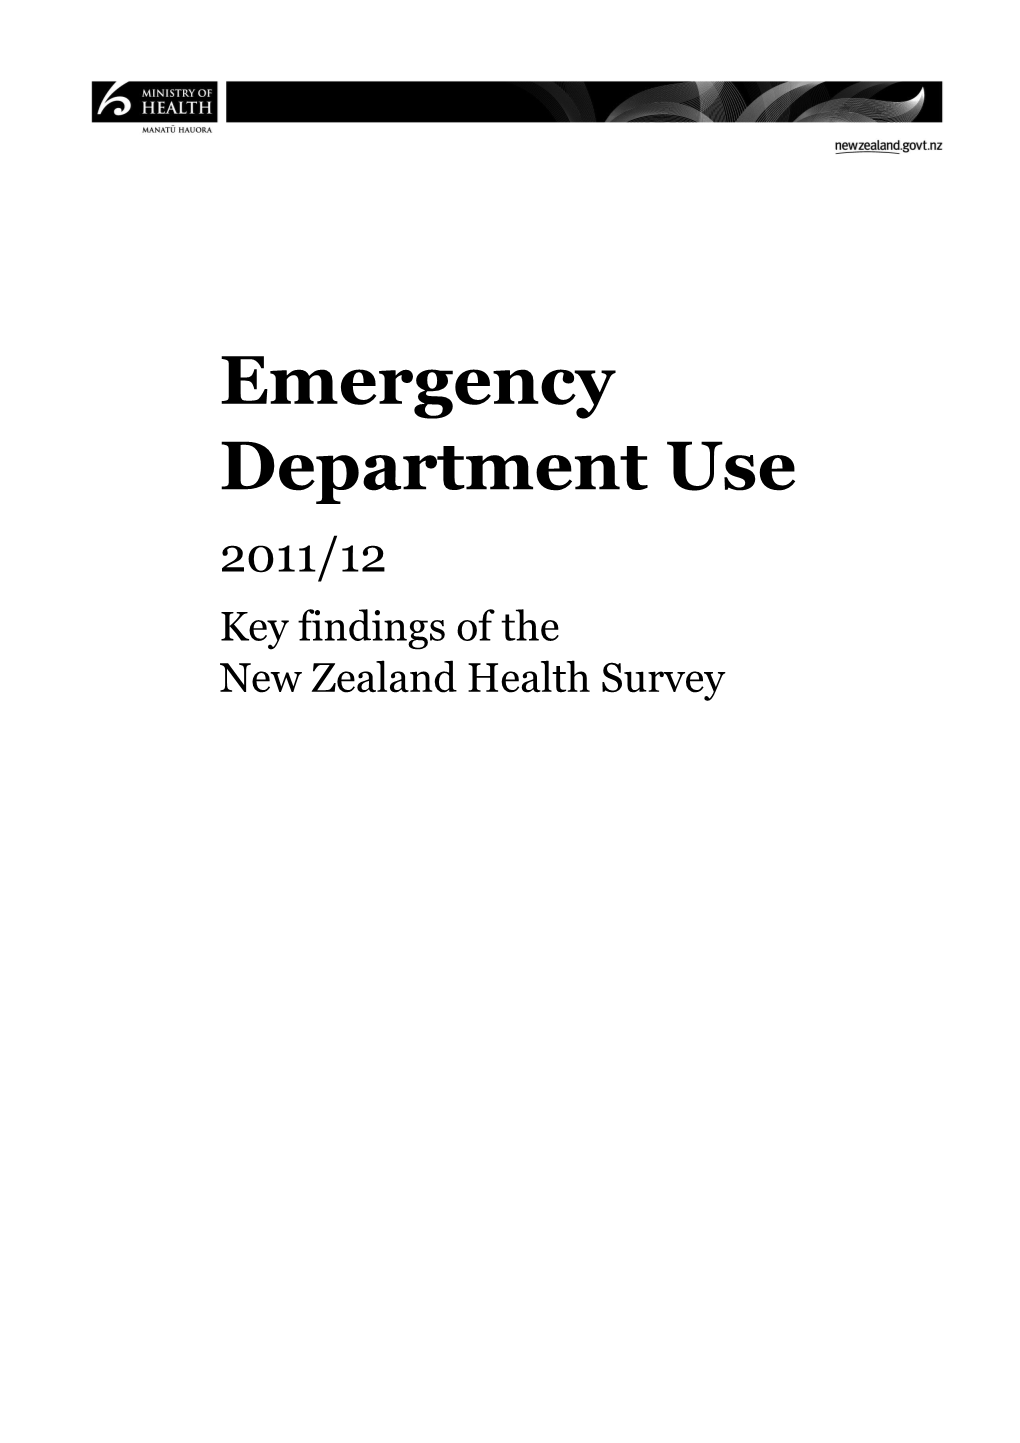 Emergency Department Use